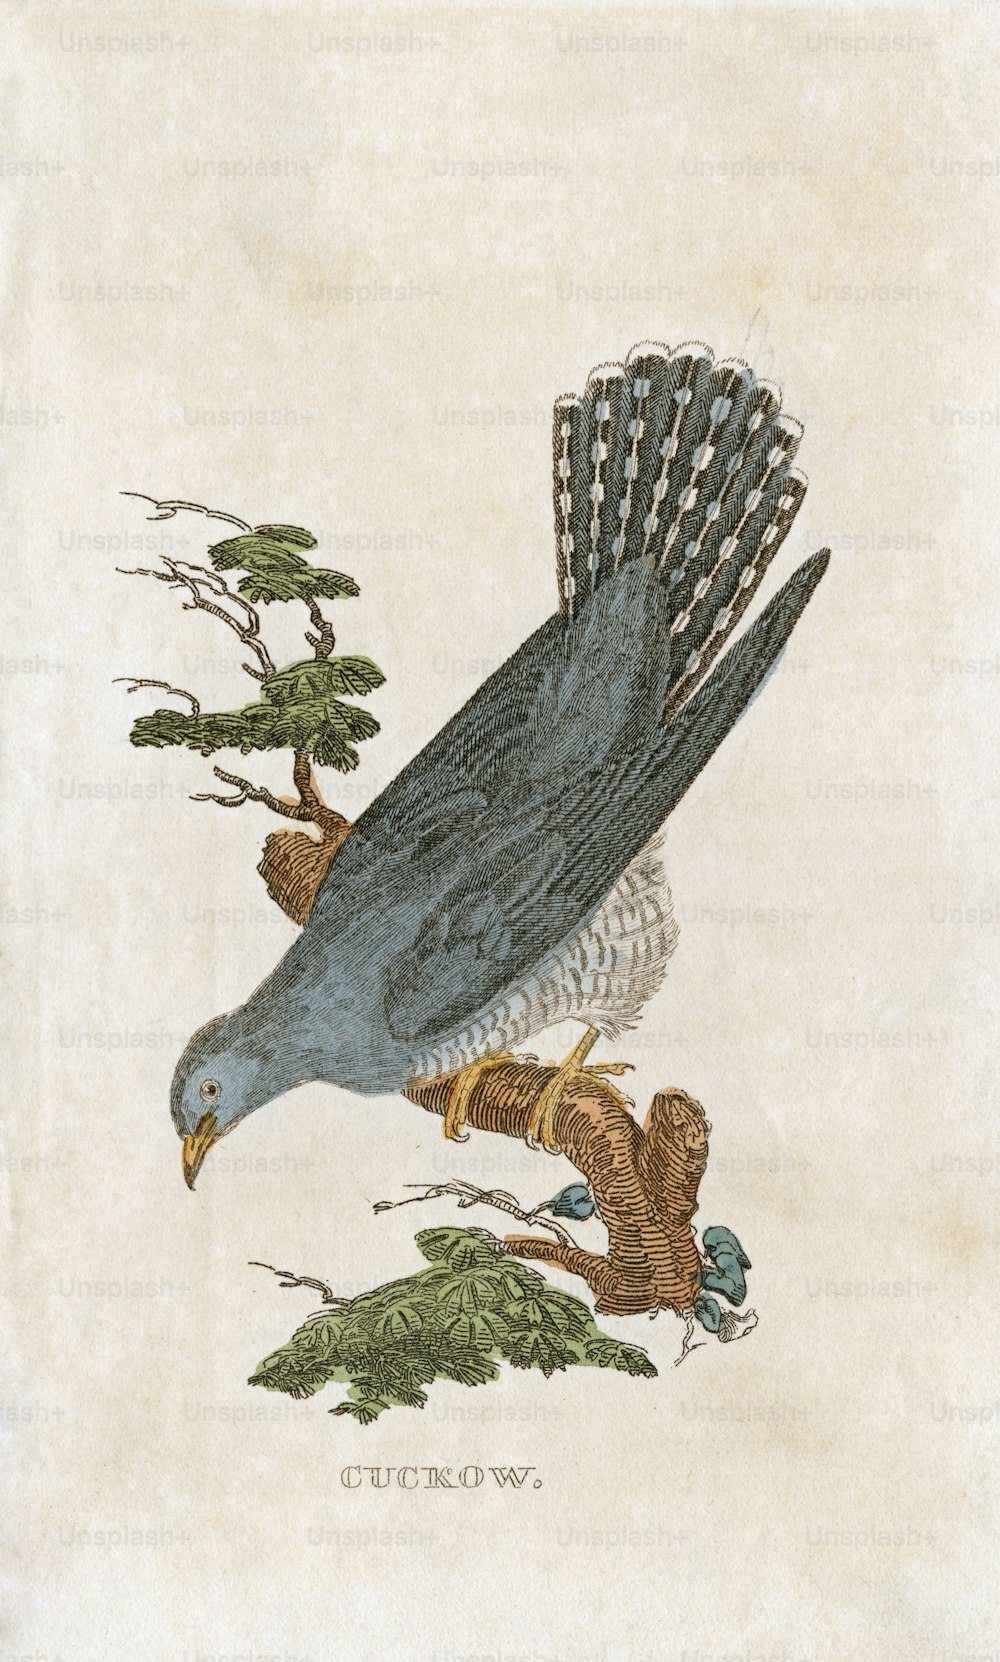 A plate illustration of a 'Cuckow', or cuckoo, circa 1850. (Photo by Hulton Archive/Getty Images)